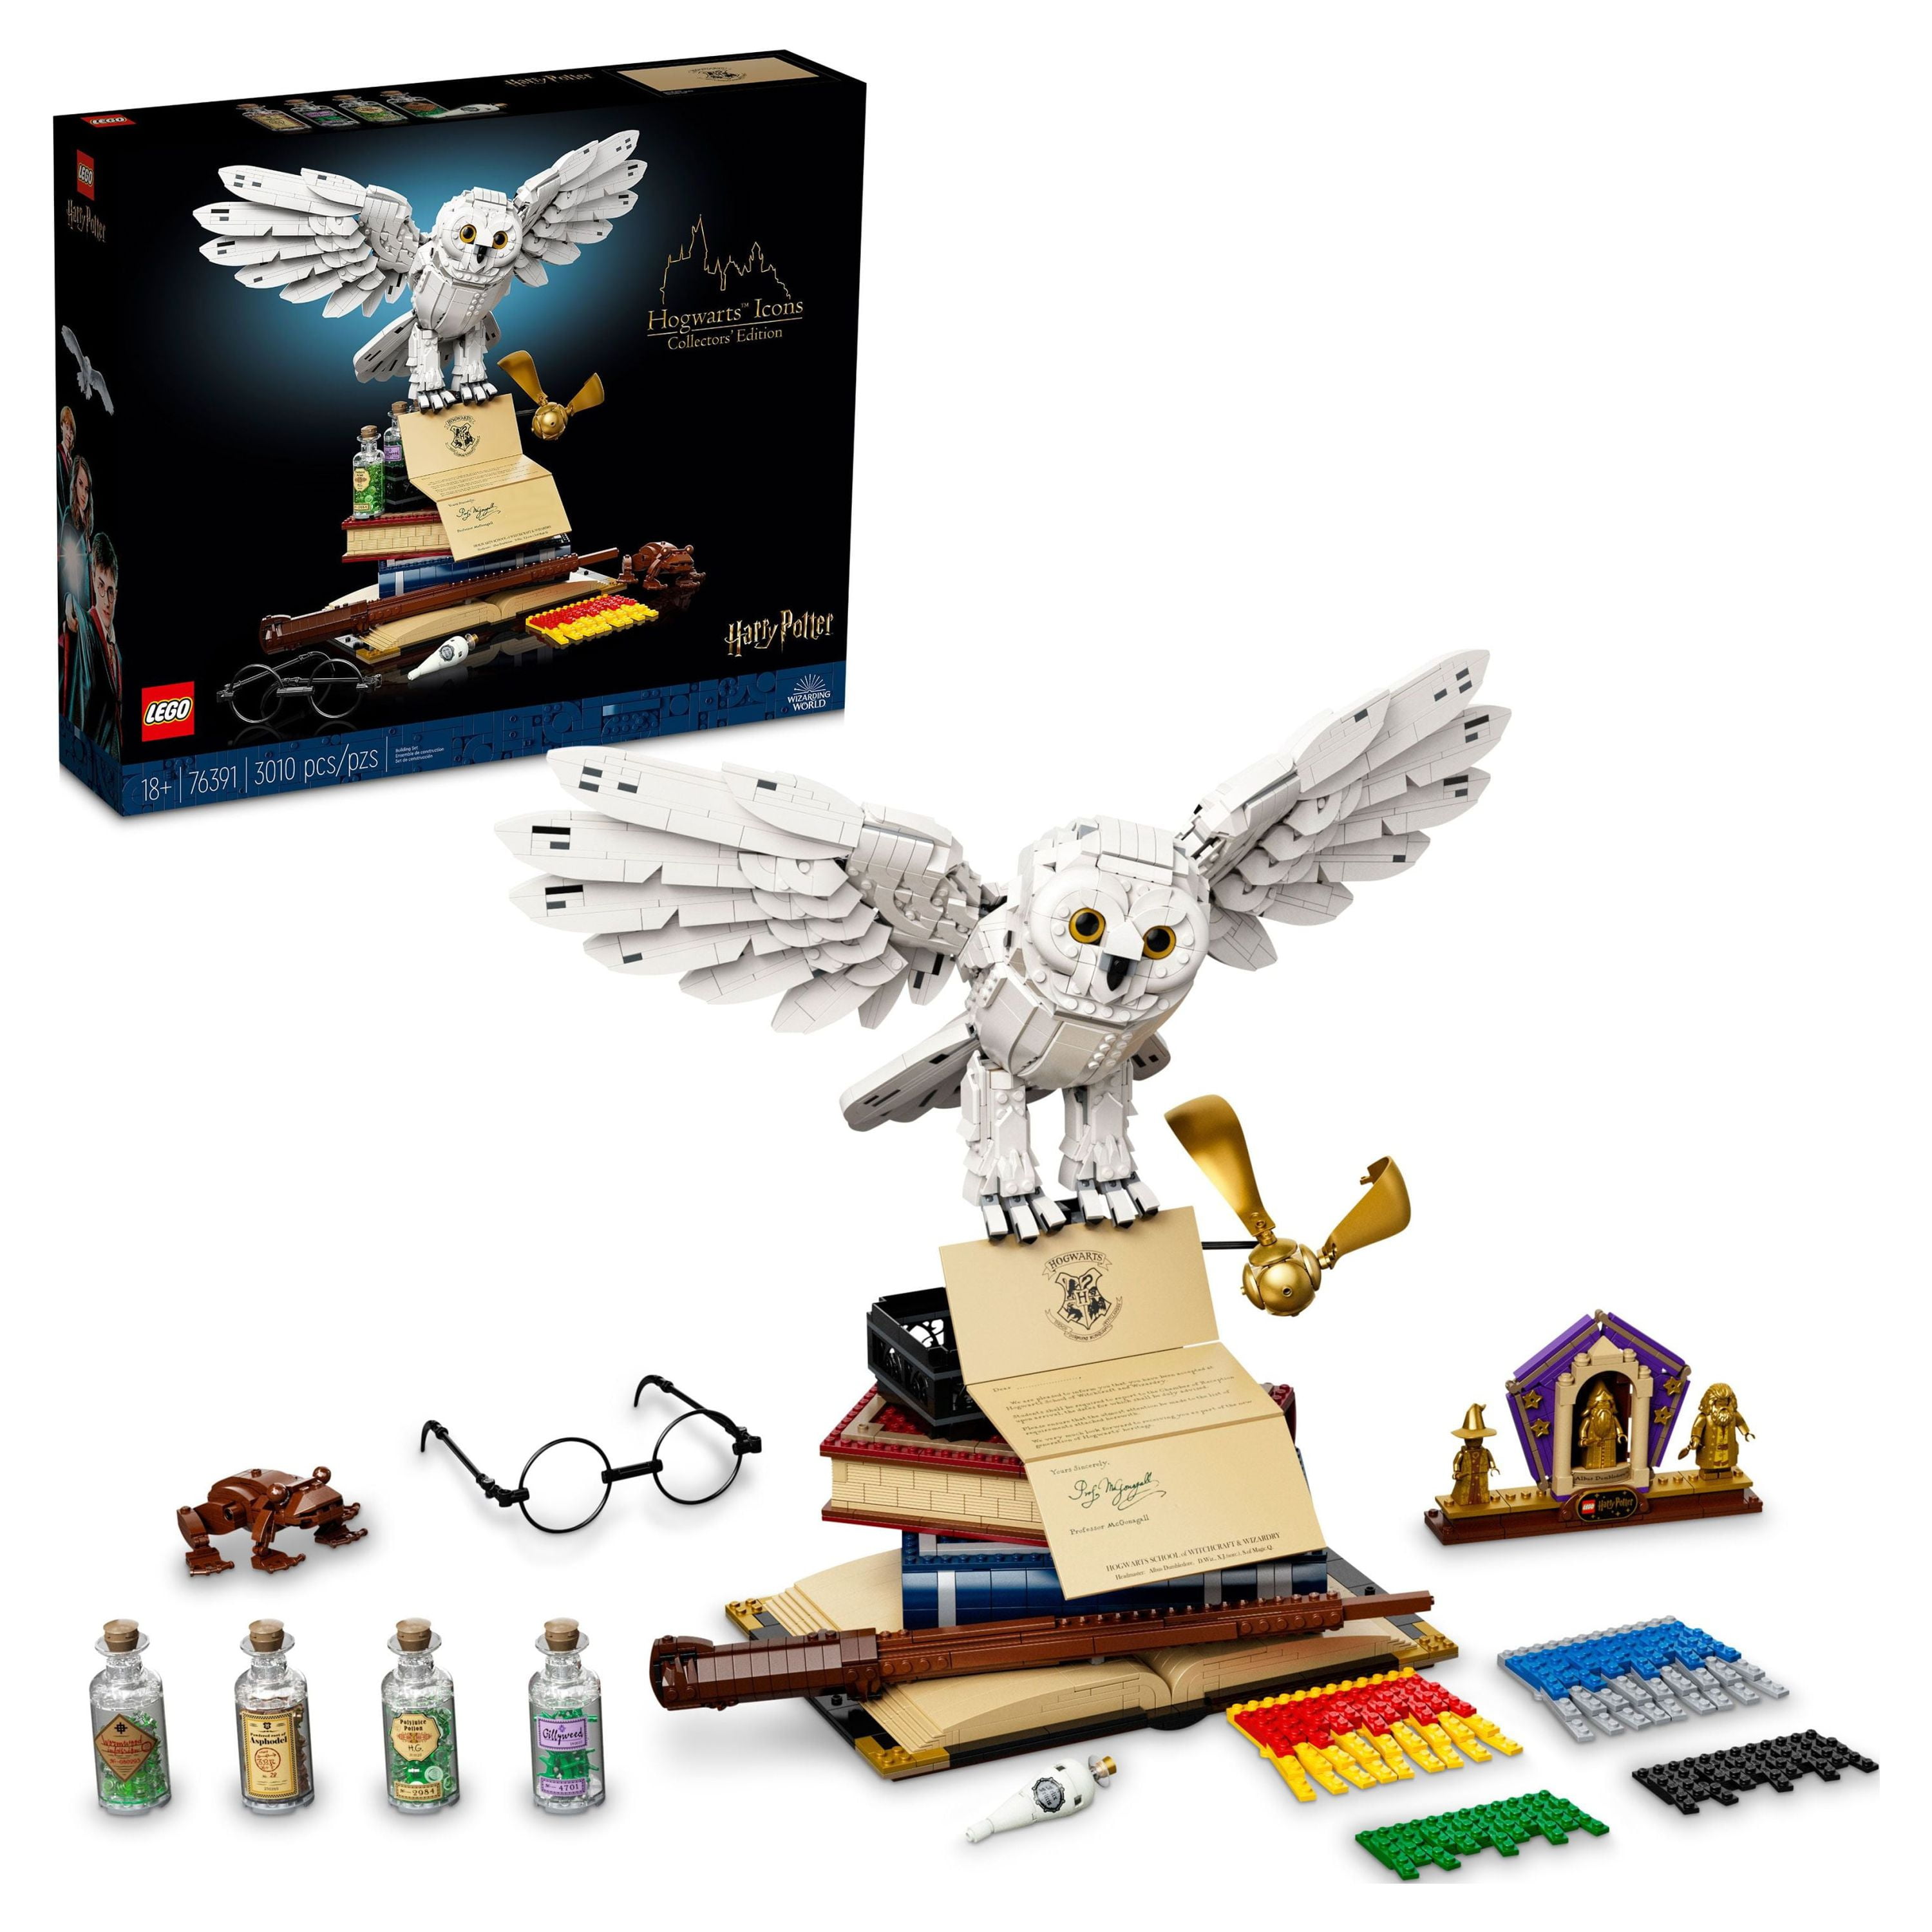 Six New Harry Potter LEGO Sets Include Centaur Minifigures and a Mechanical  Hedwig